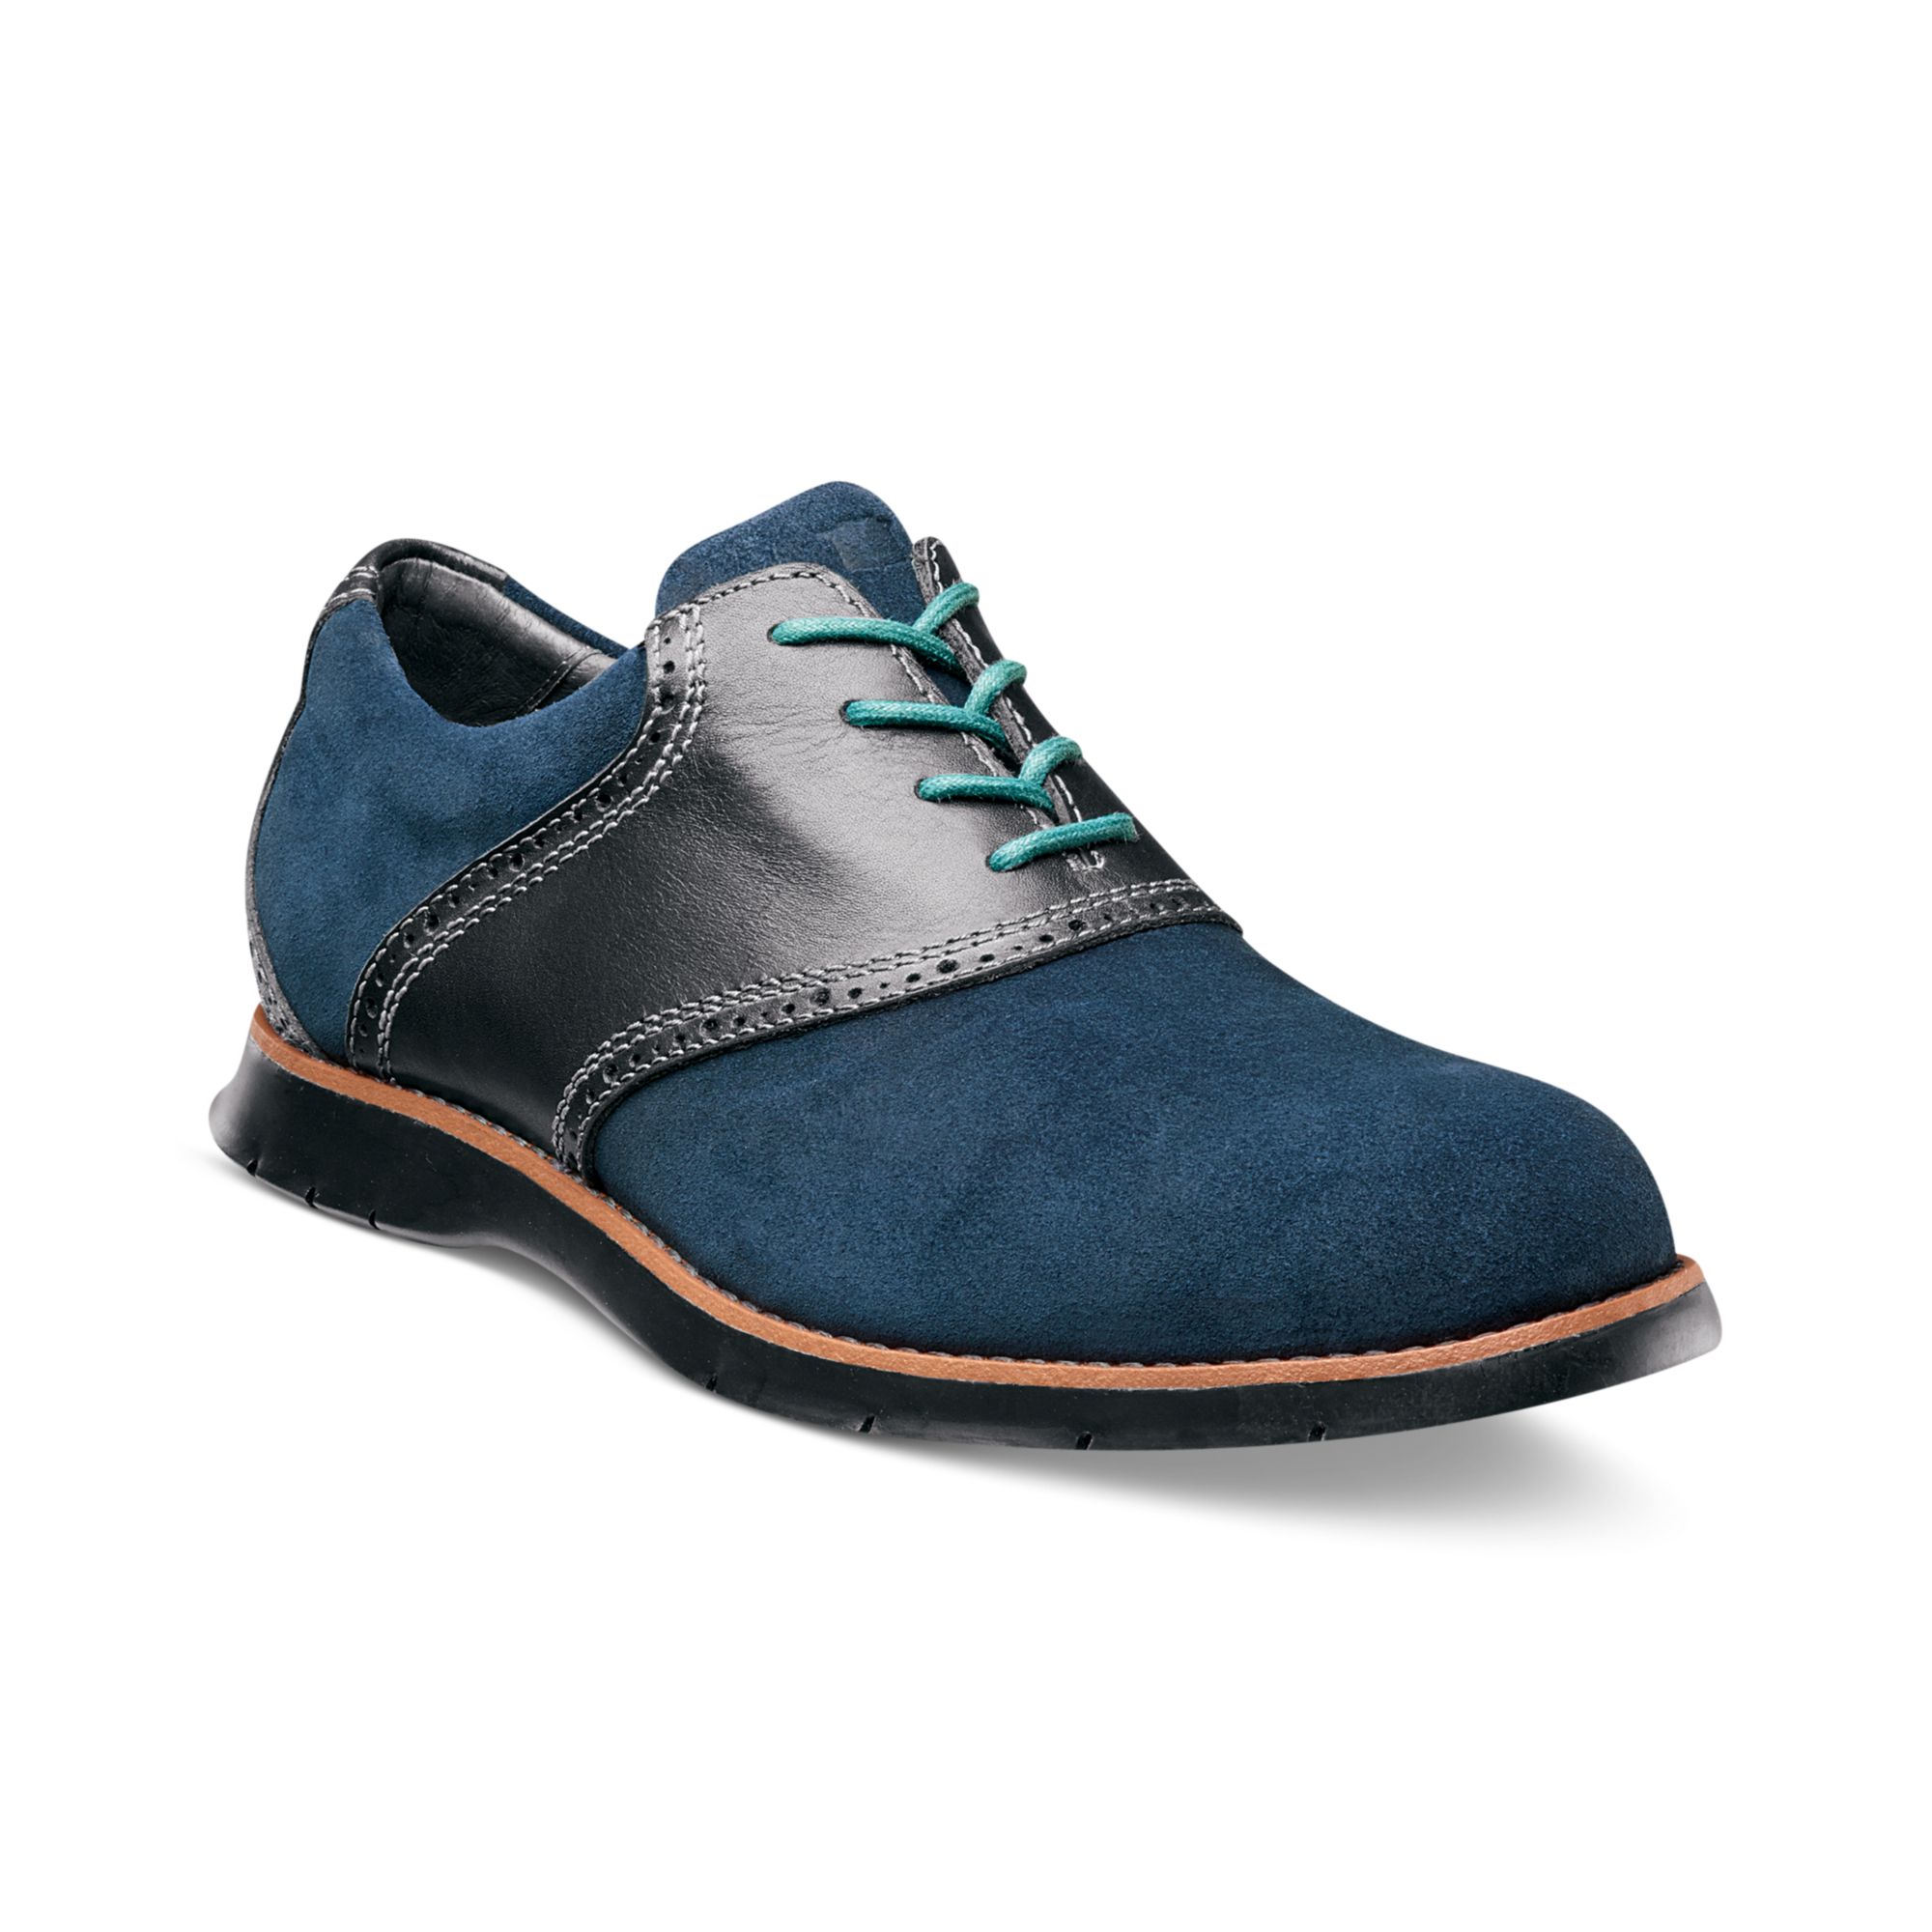 Lyst - Florsheim Flites Saddle Laceup Shoes with Comfortechnology in ...